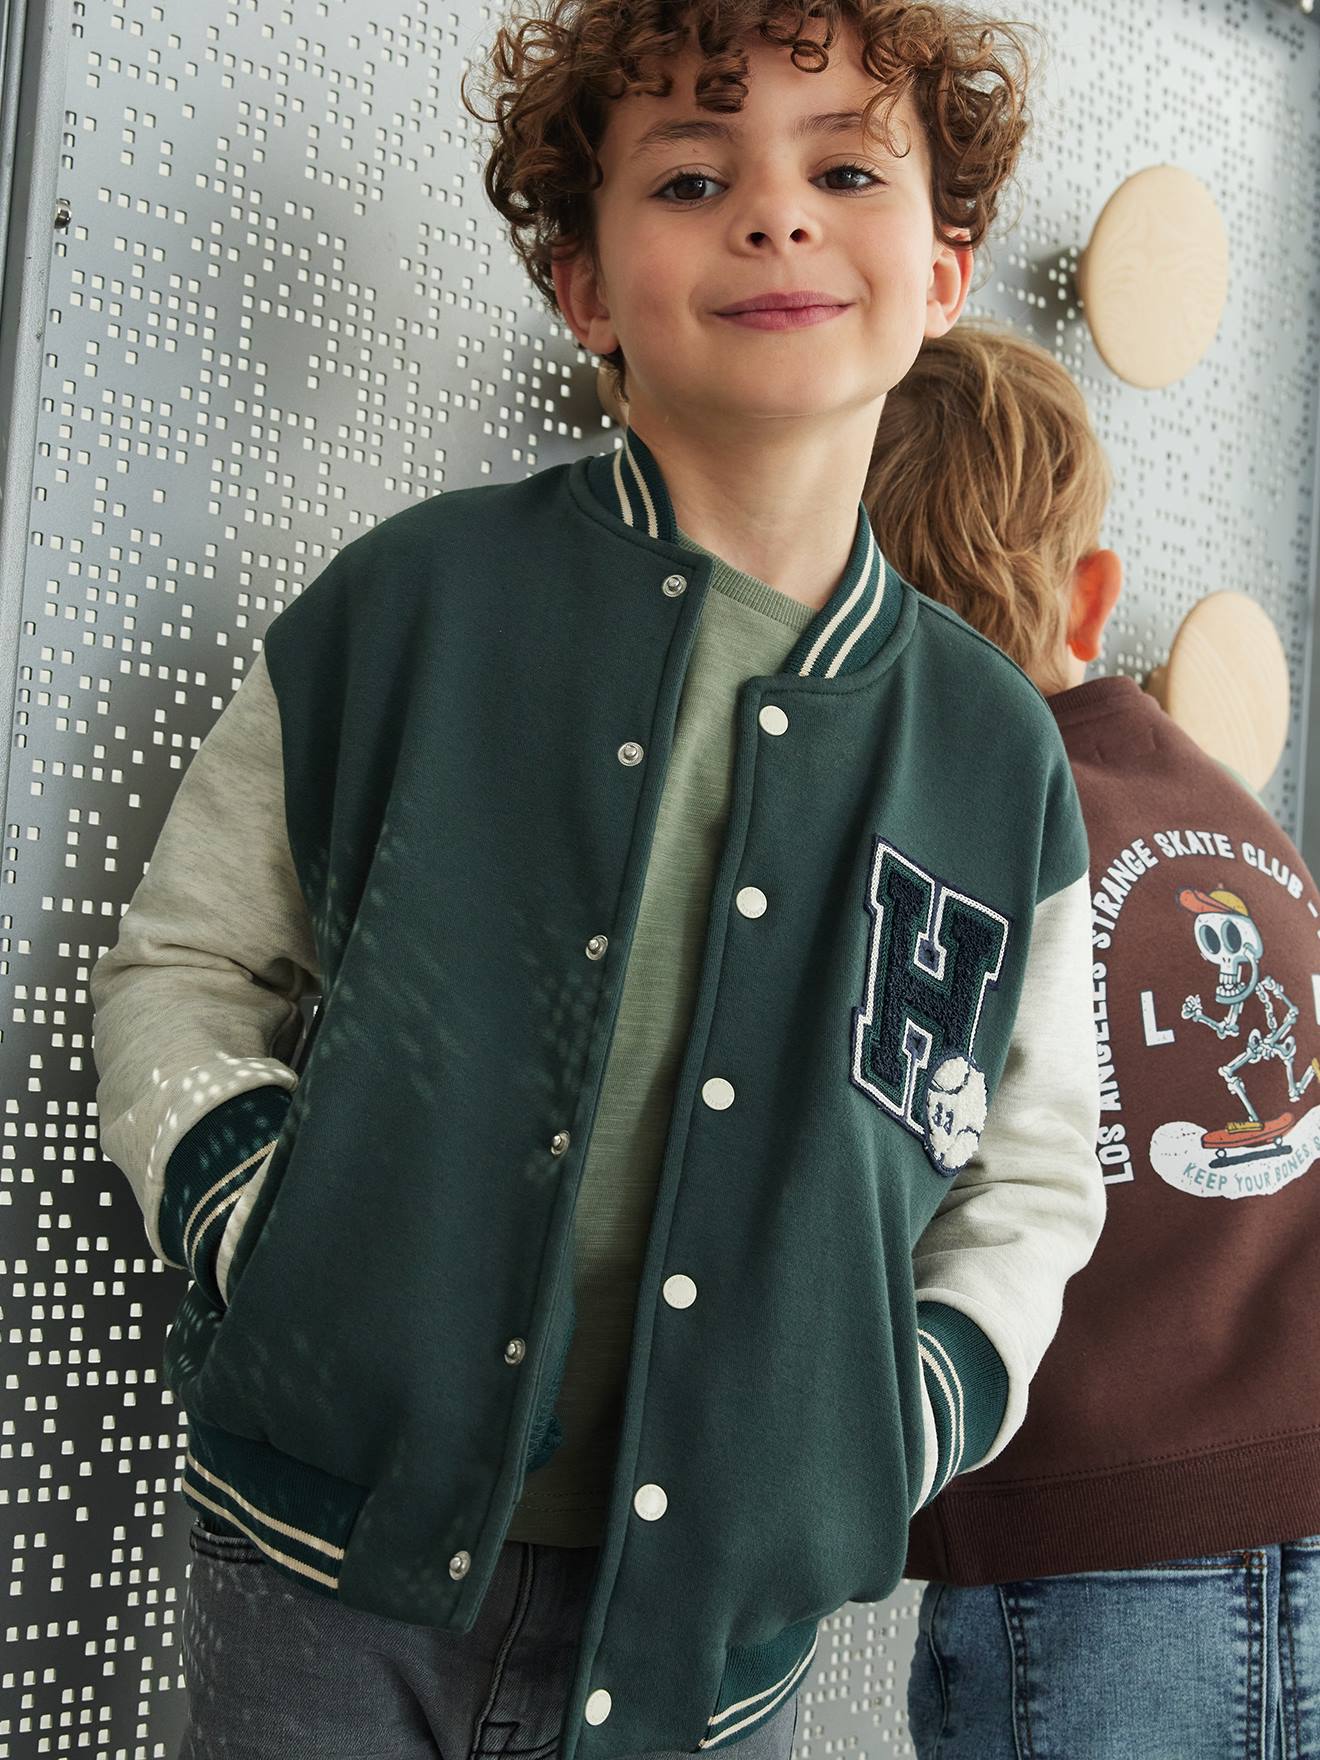 College-Type Jacket in Fleece, Patch in Boucle Knit, for Boys fir green